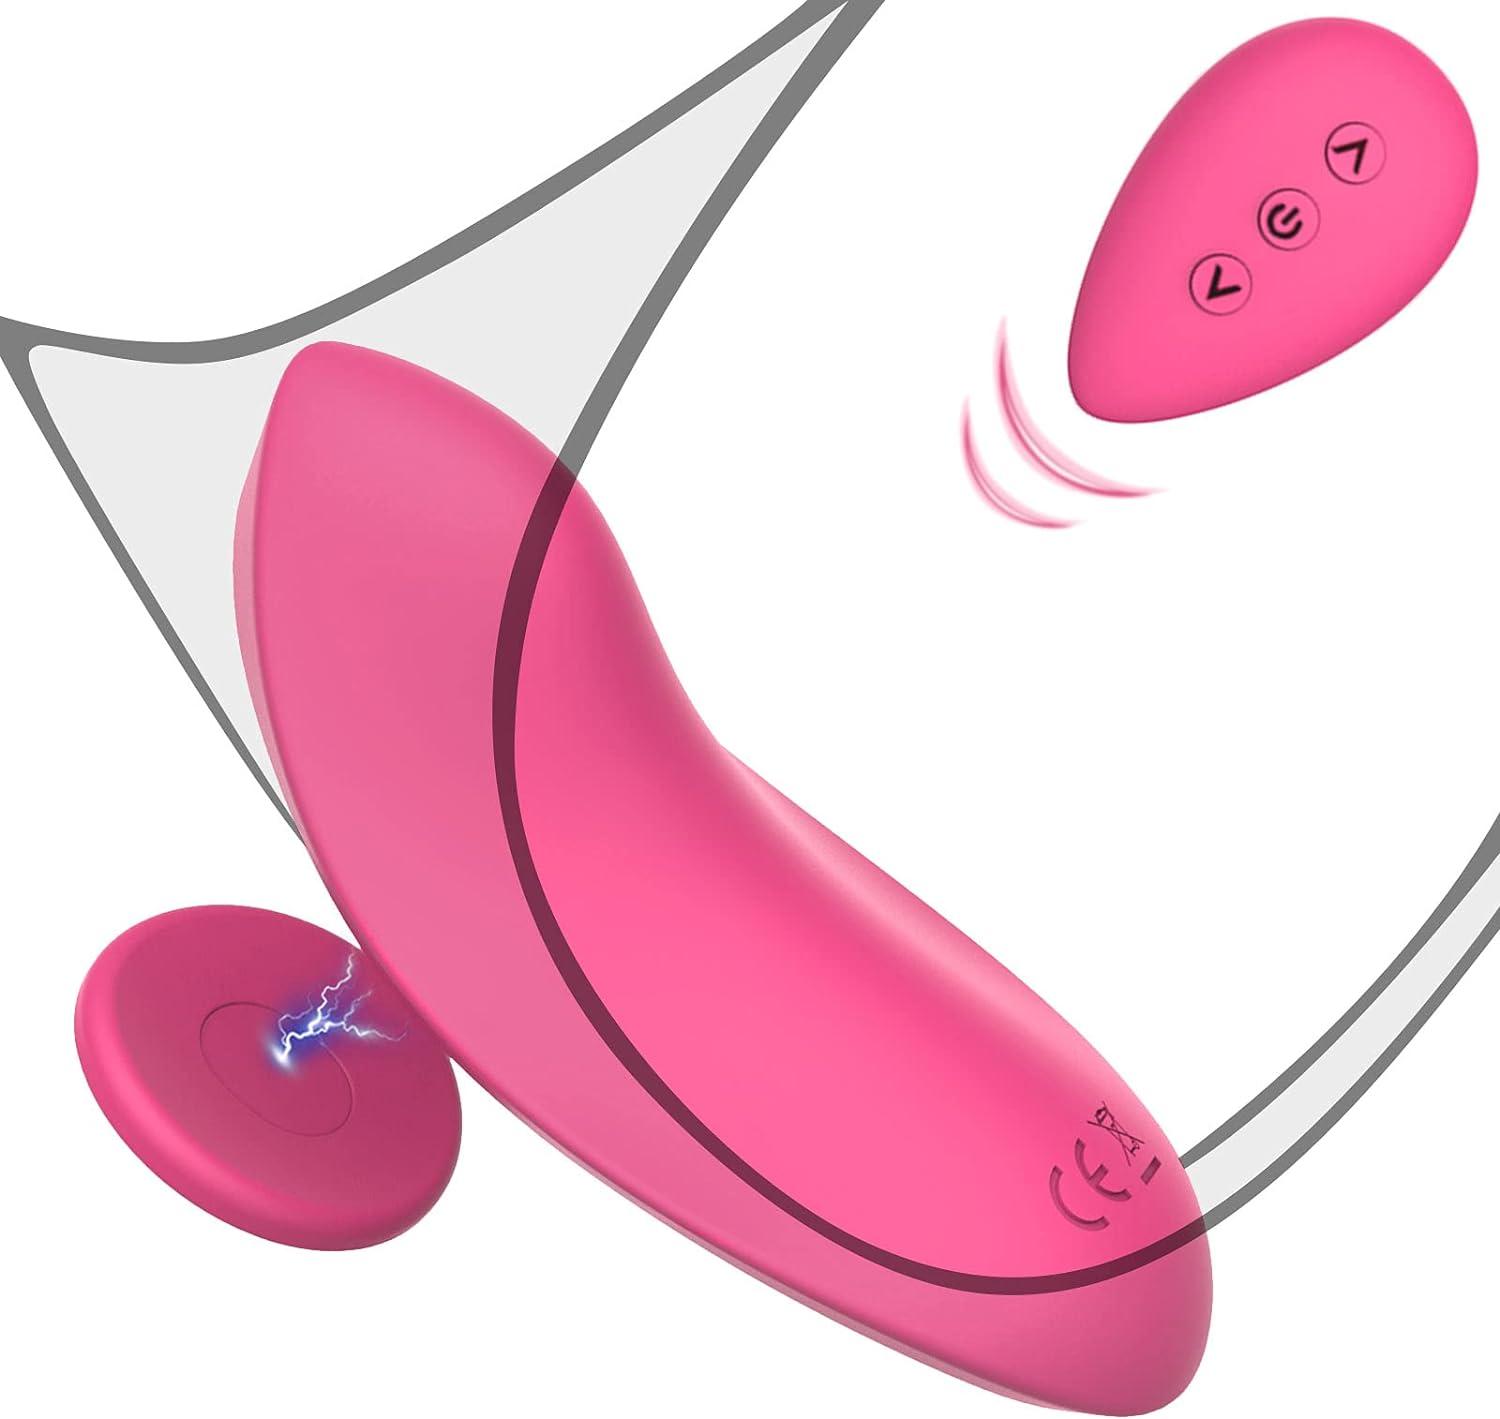 Pinkzoom Panty Vibrador Remote Control Juguetes Sexuales Sex Toys Wireless Wearable Vibrator For Women